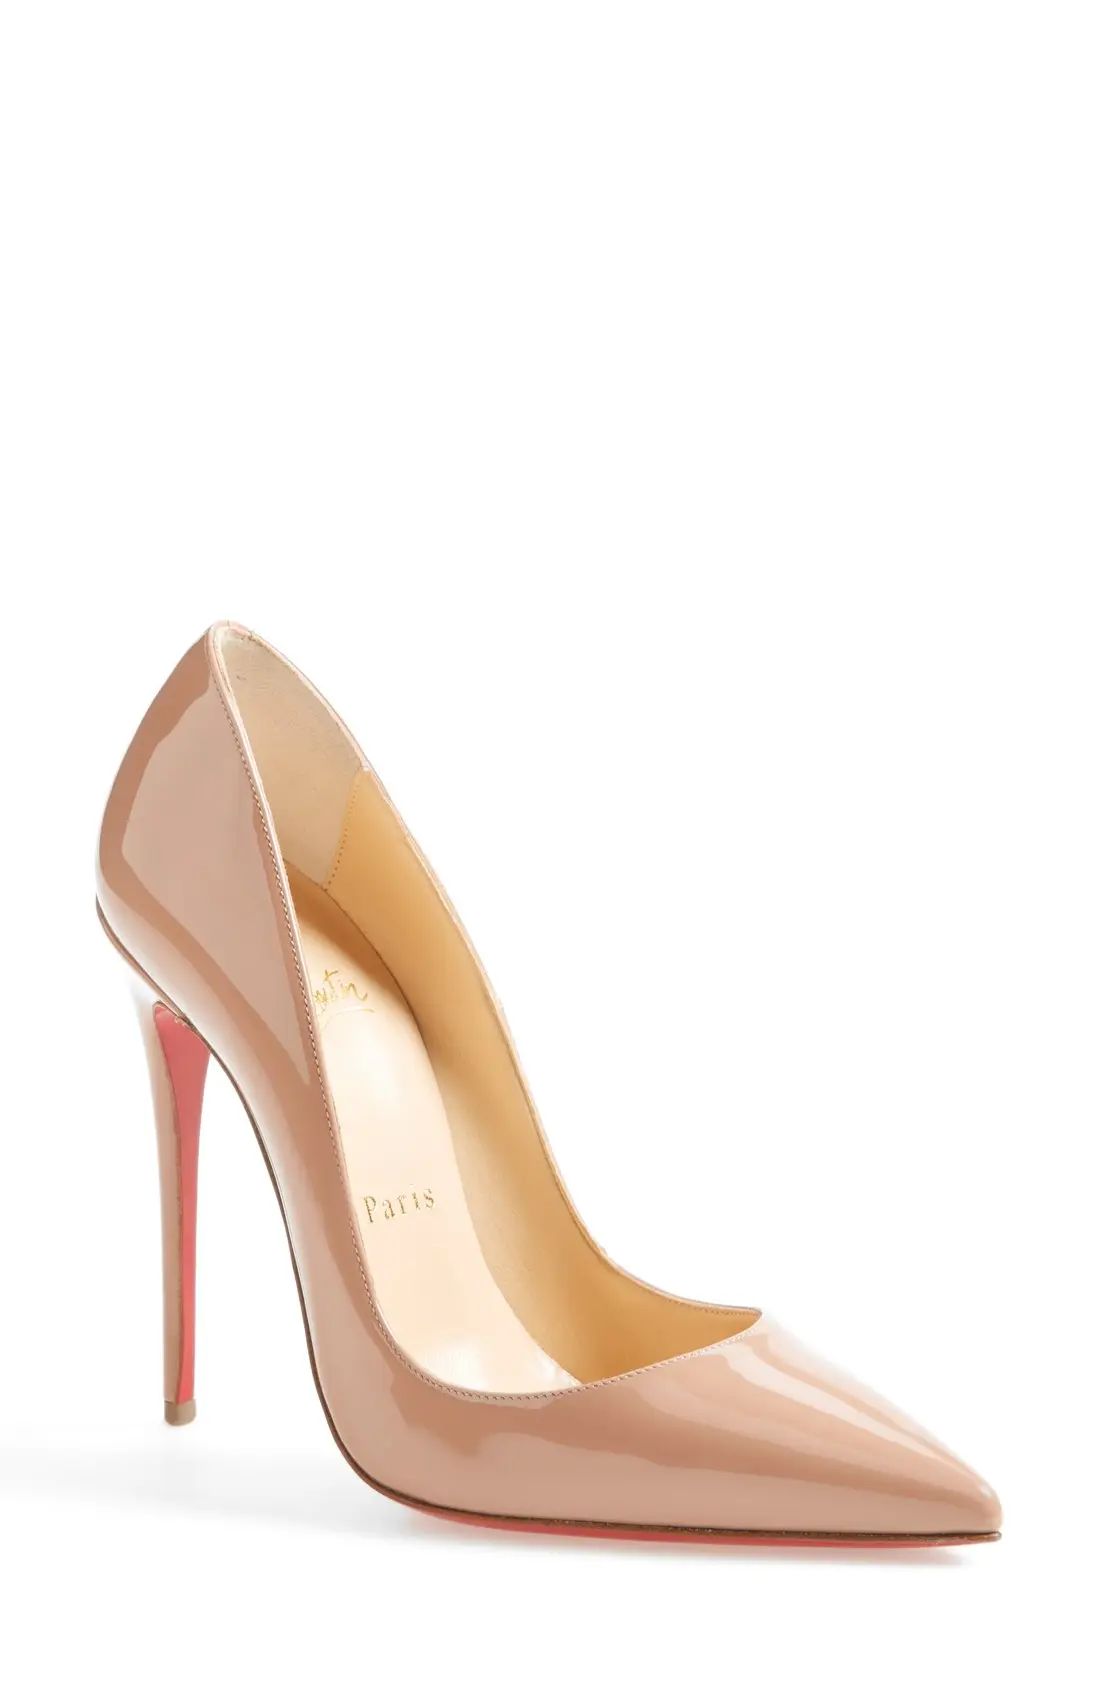 Christian Louboutin So Kate Pointed Toe Pump in Nude at Nordstrom, Size 10Us | Nordstrom